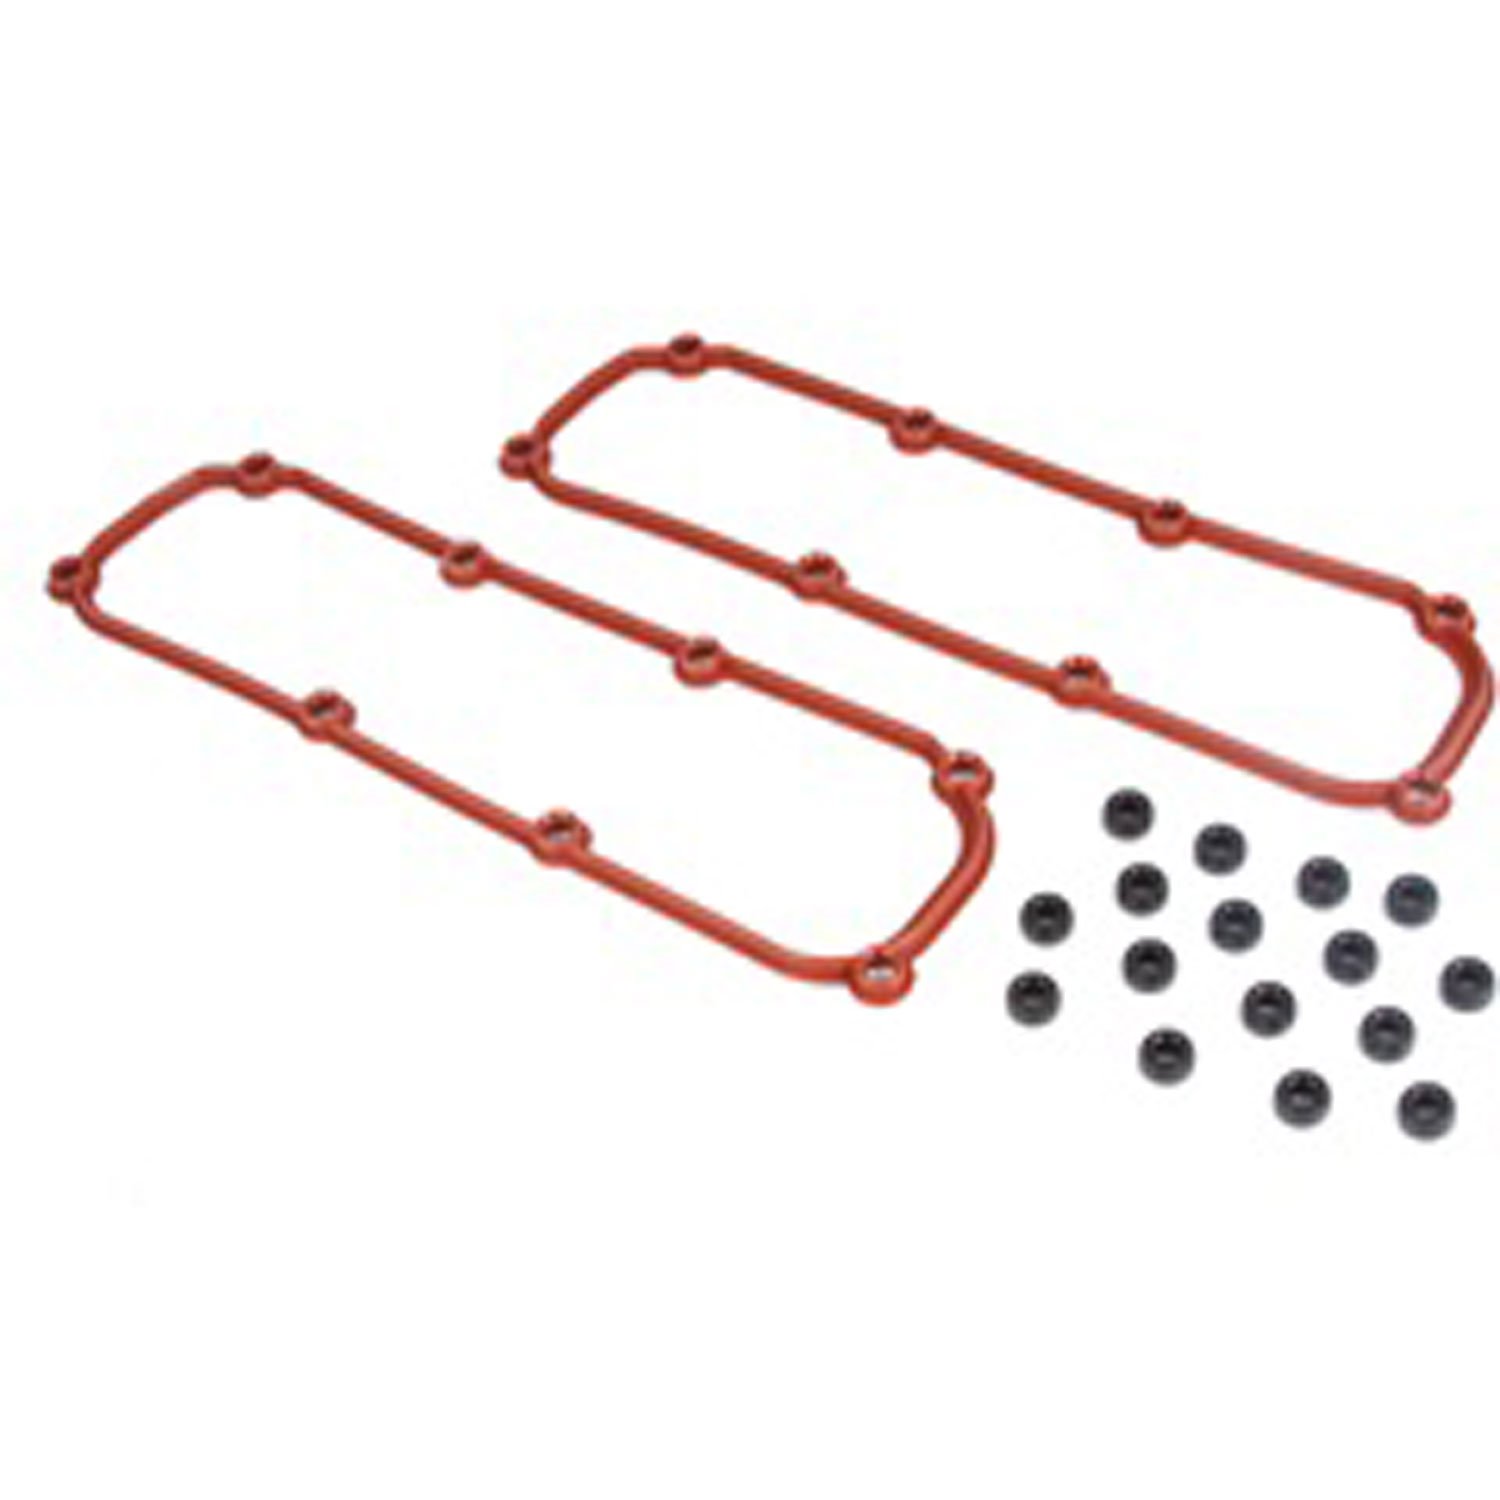 This pair of valve cover gaskets from Omix-ADA fit the 3.8L engine in 07-11 Jeep Wrangler.